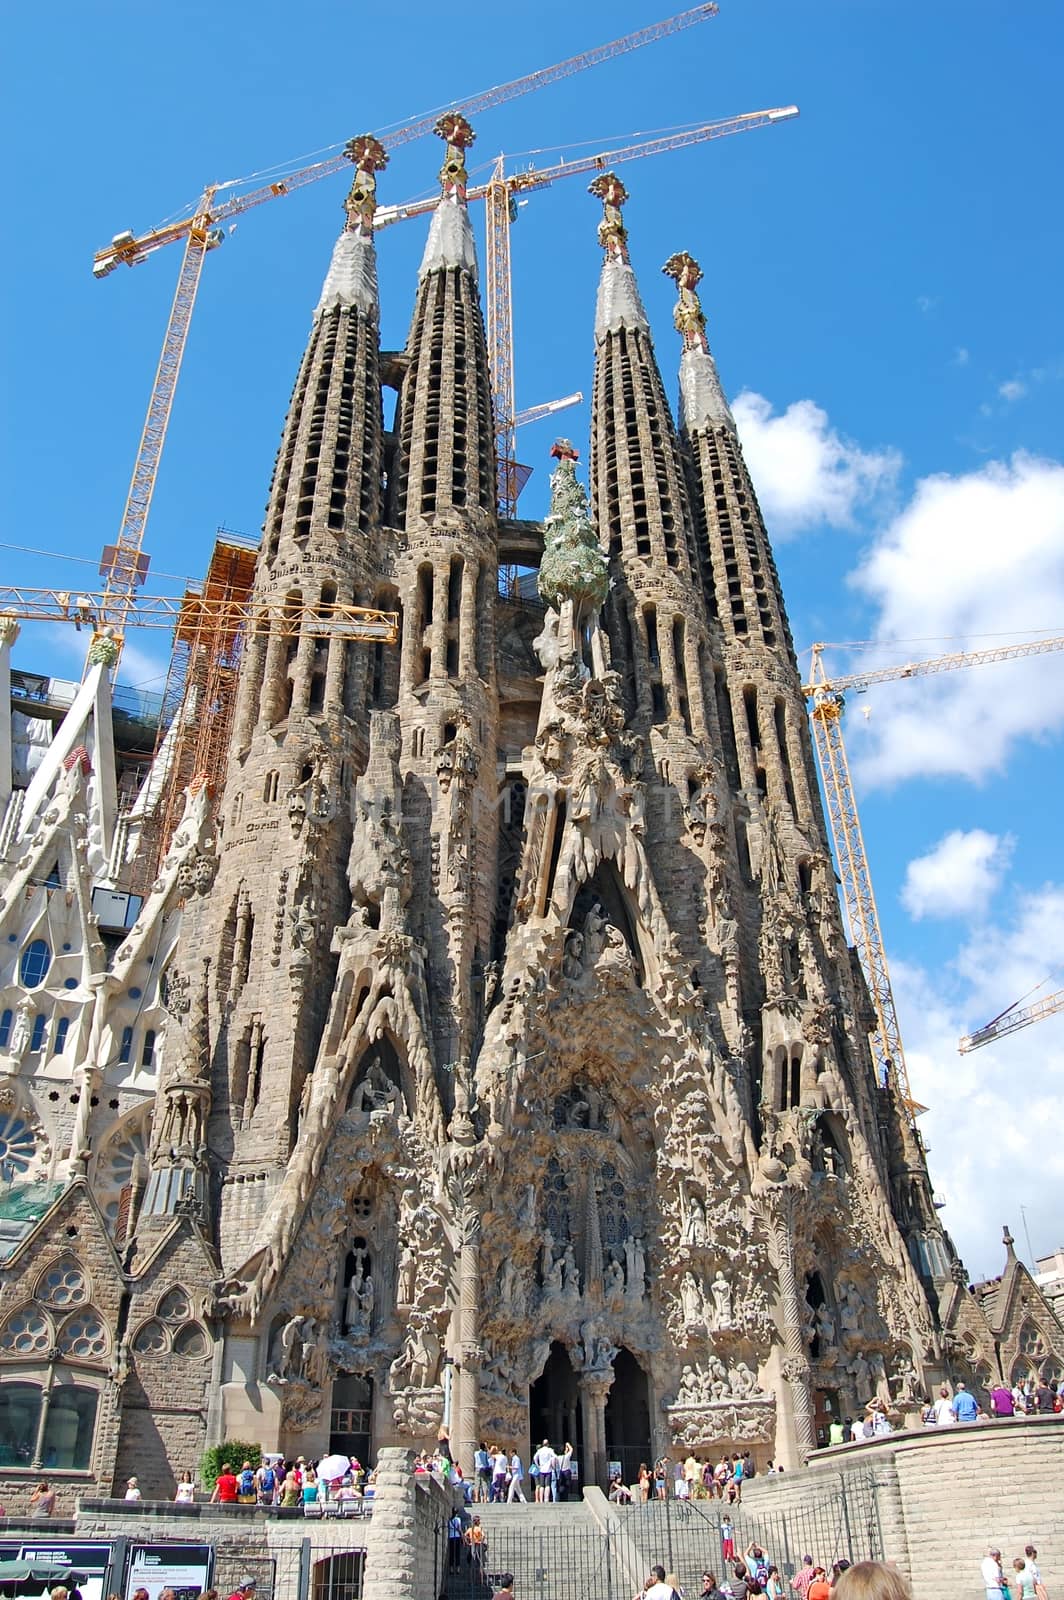 BARCELONA SPAIN - JULY 19: La Sagrada Familia - the impressive cathedral designed by Gaudi, which is built since 1882 and has not yet been achieved July 19, 2009 in Barcelona, Spain.